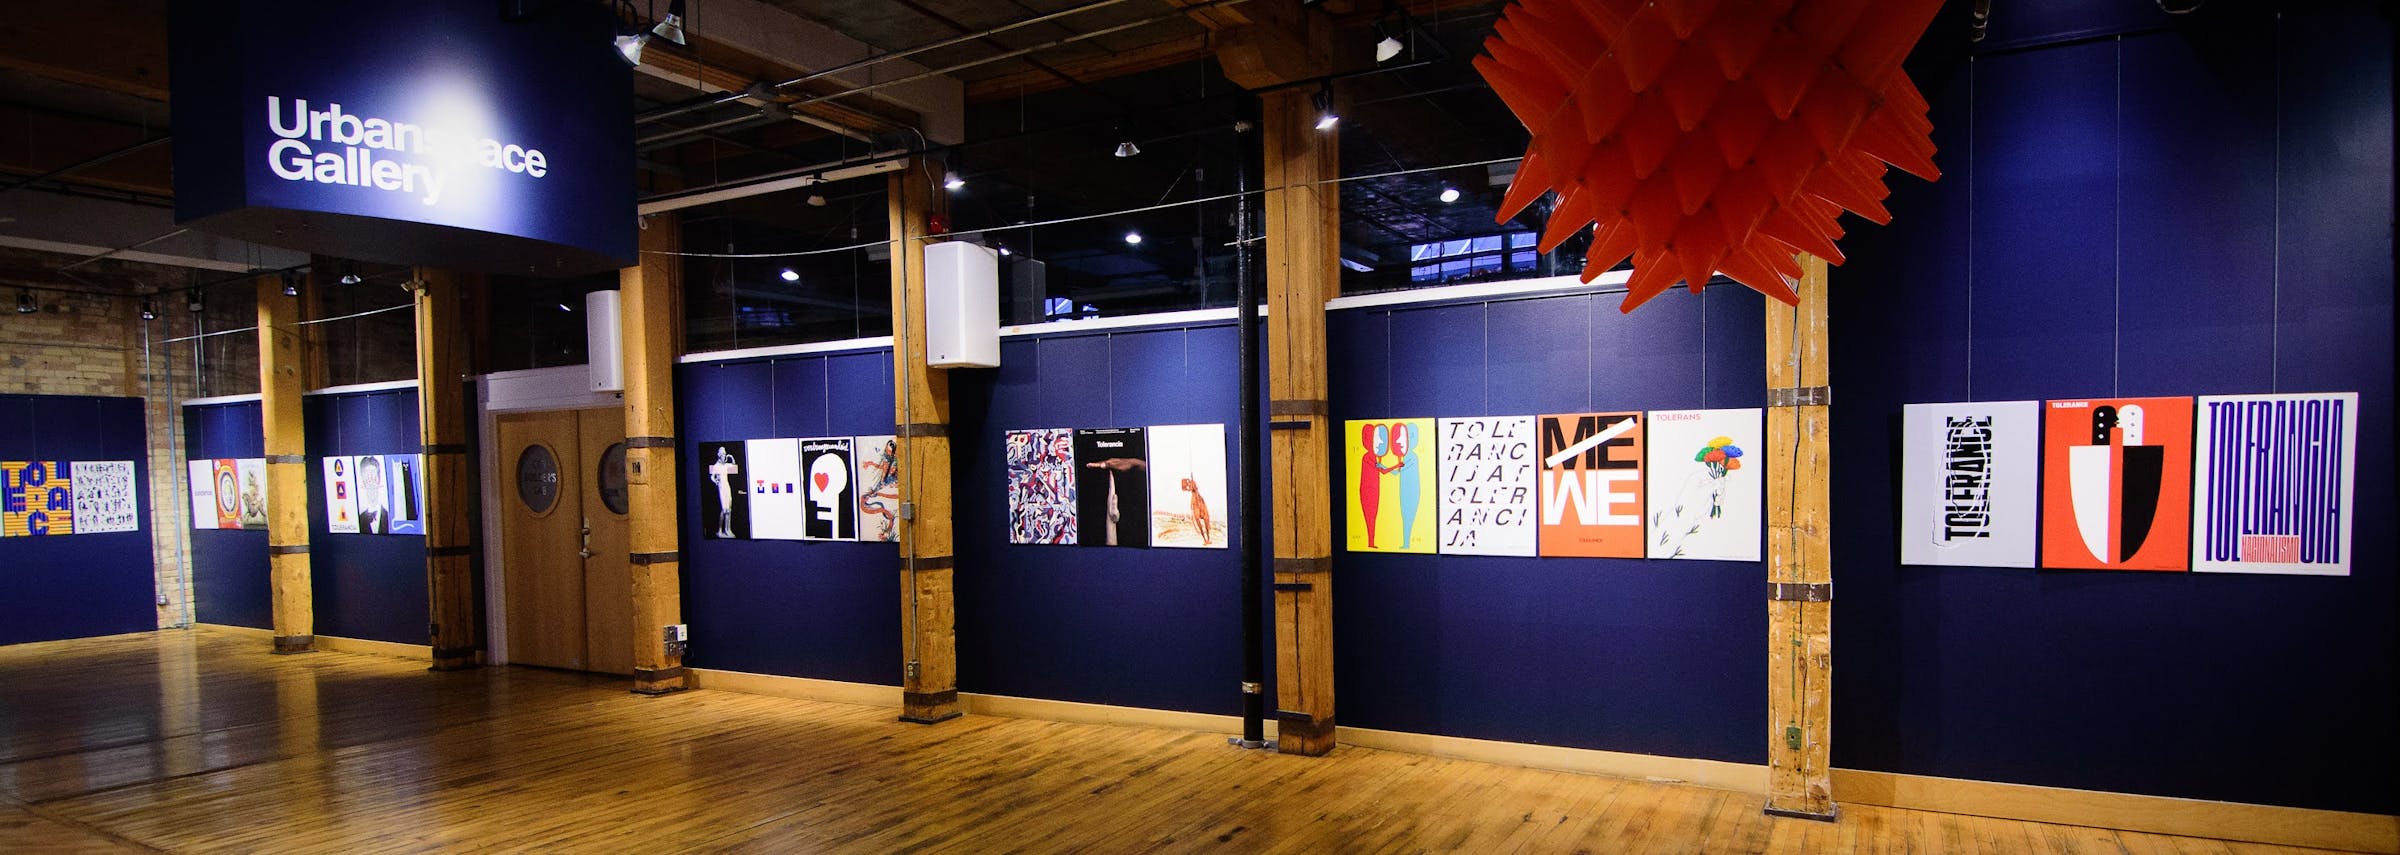 Tolerance posters on display in a gallery space